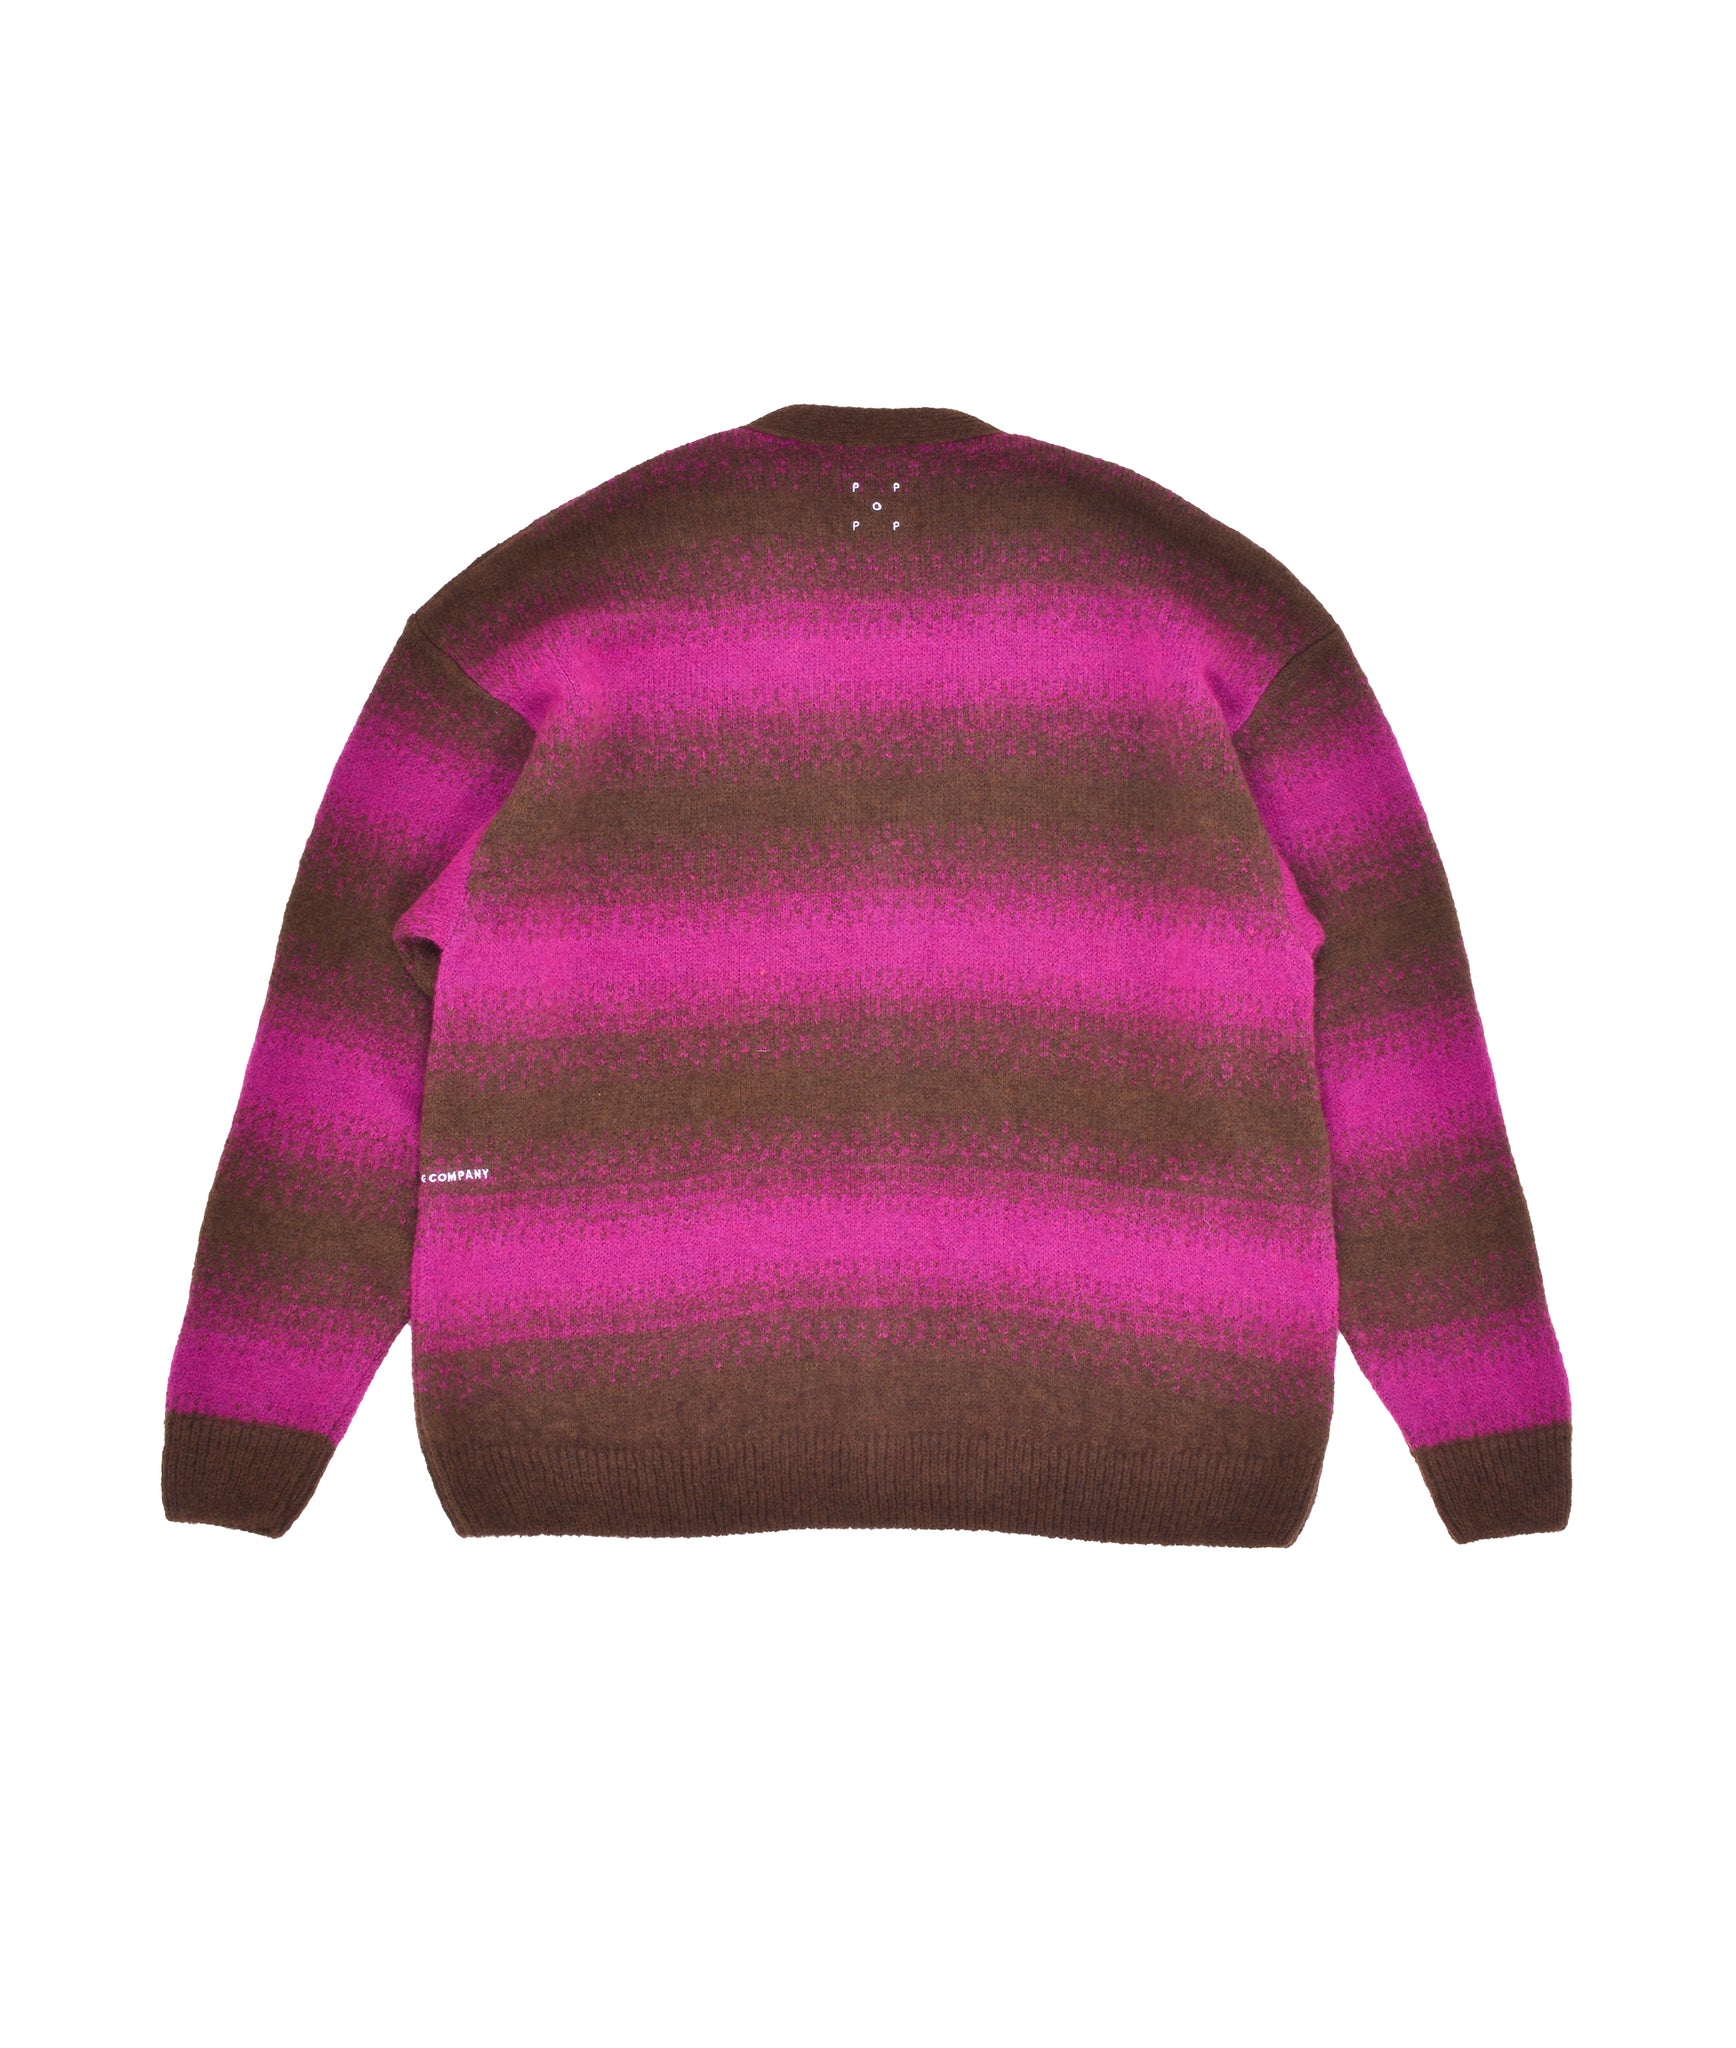 Knitted Cardigan - Delicioso/Raspberry